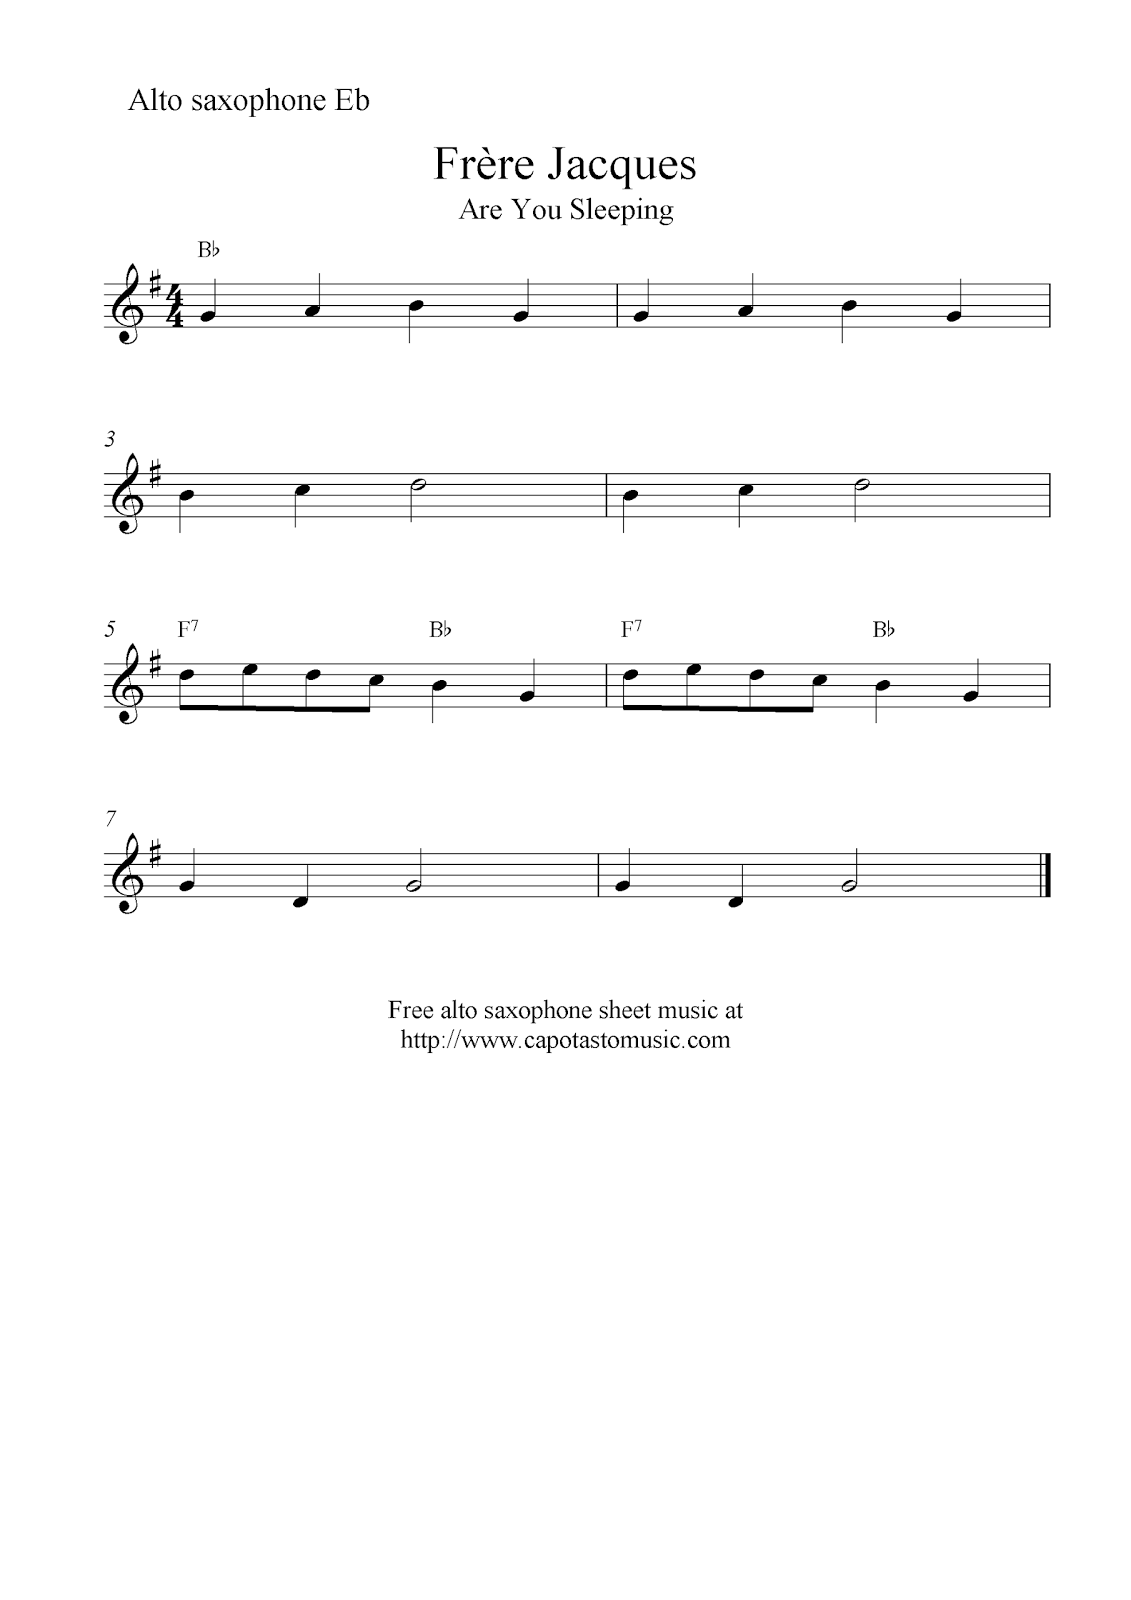 Frère Jacques (Are You Sleeping), free alto saxophone sheet music notes